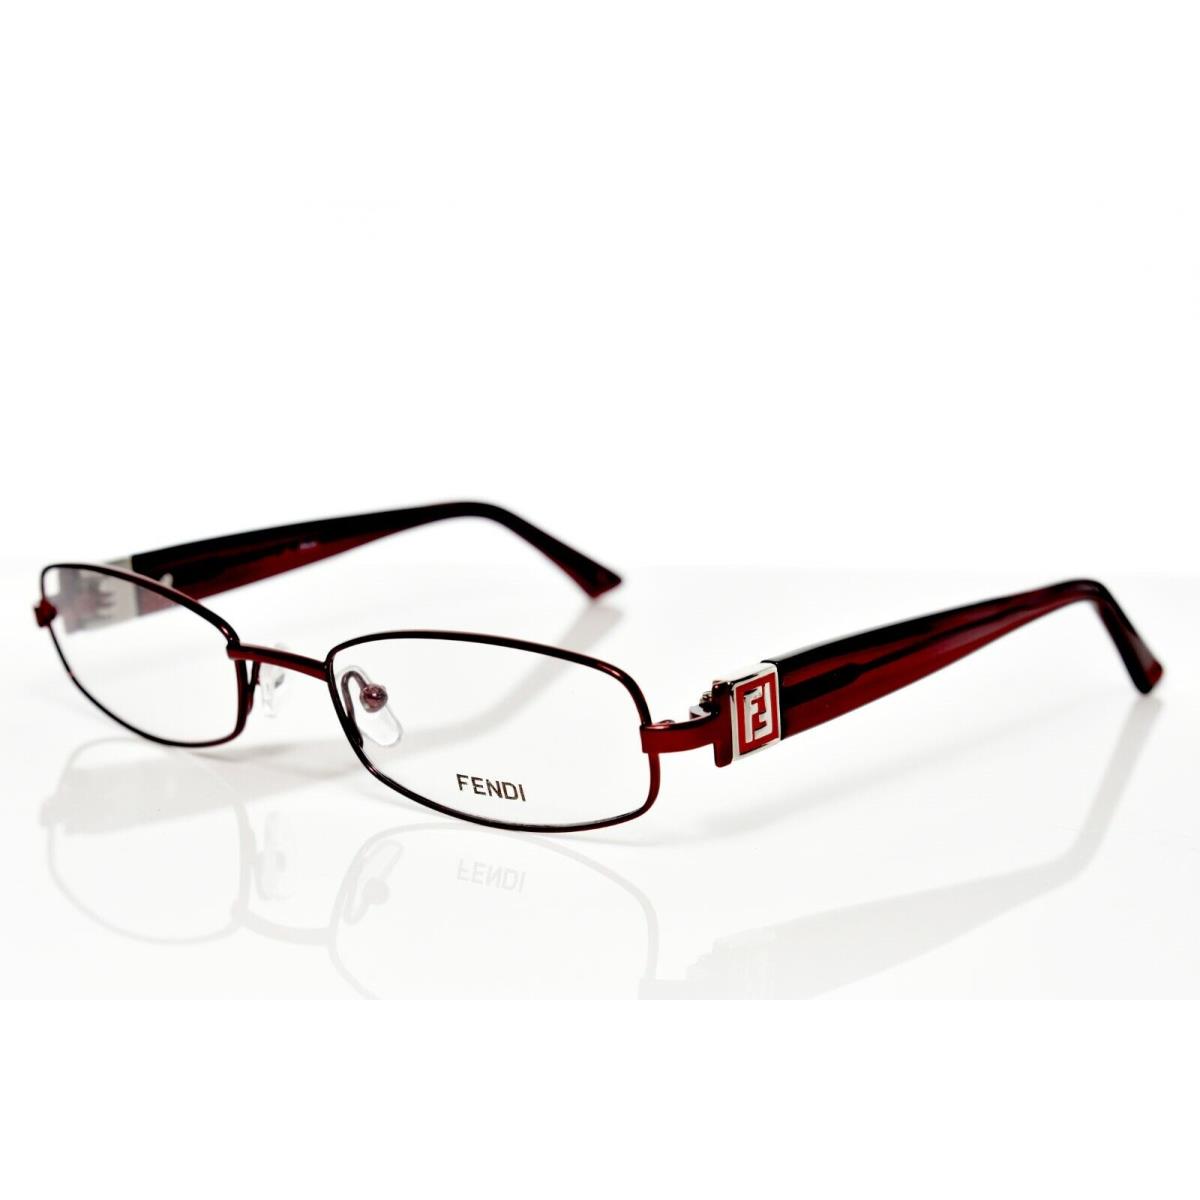 Fendi 905 519 Red RX Eyeglasses 52-19-130 - Nose Pads Replaced